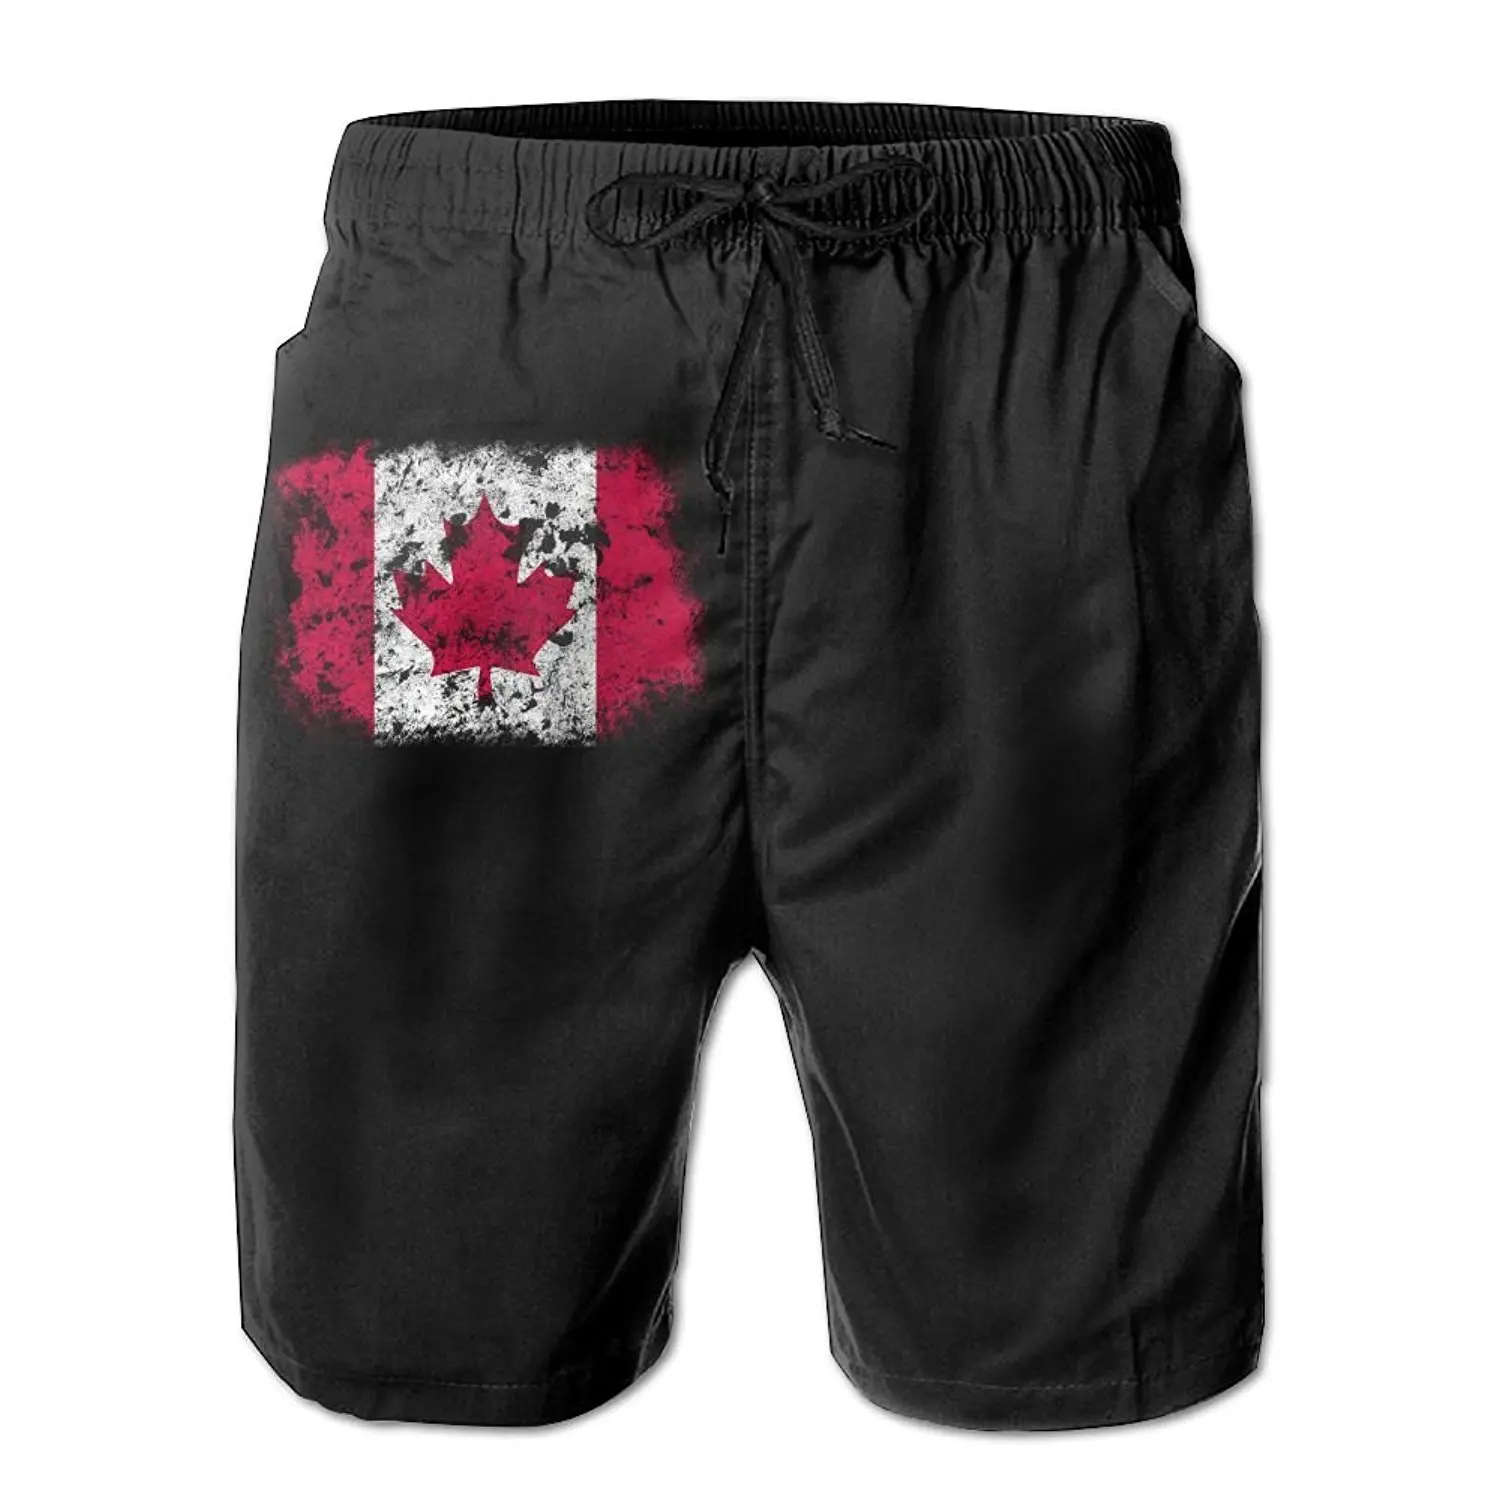 Cheap Canadian Flag Shorts, find Canadian Flag Shorts deals on line at ...